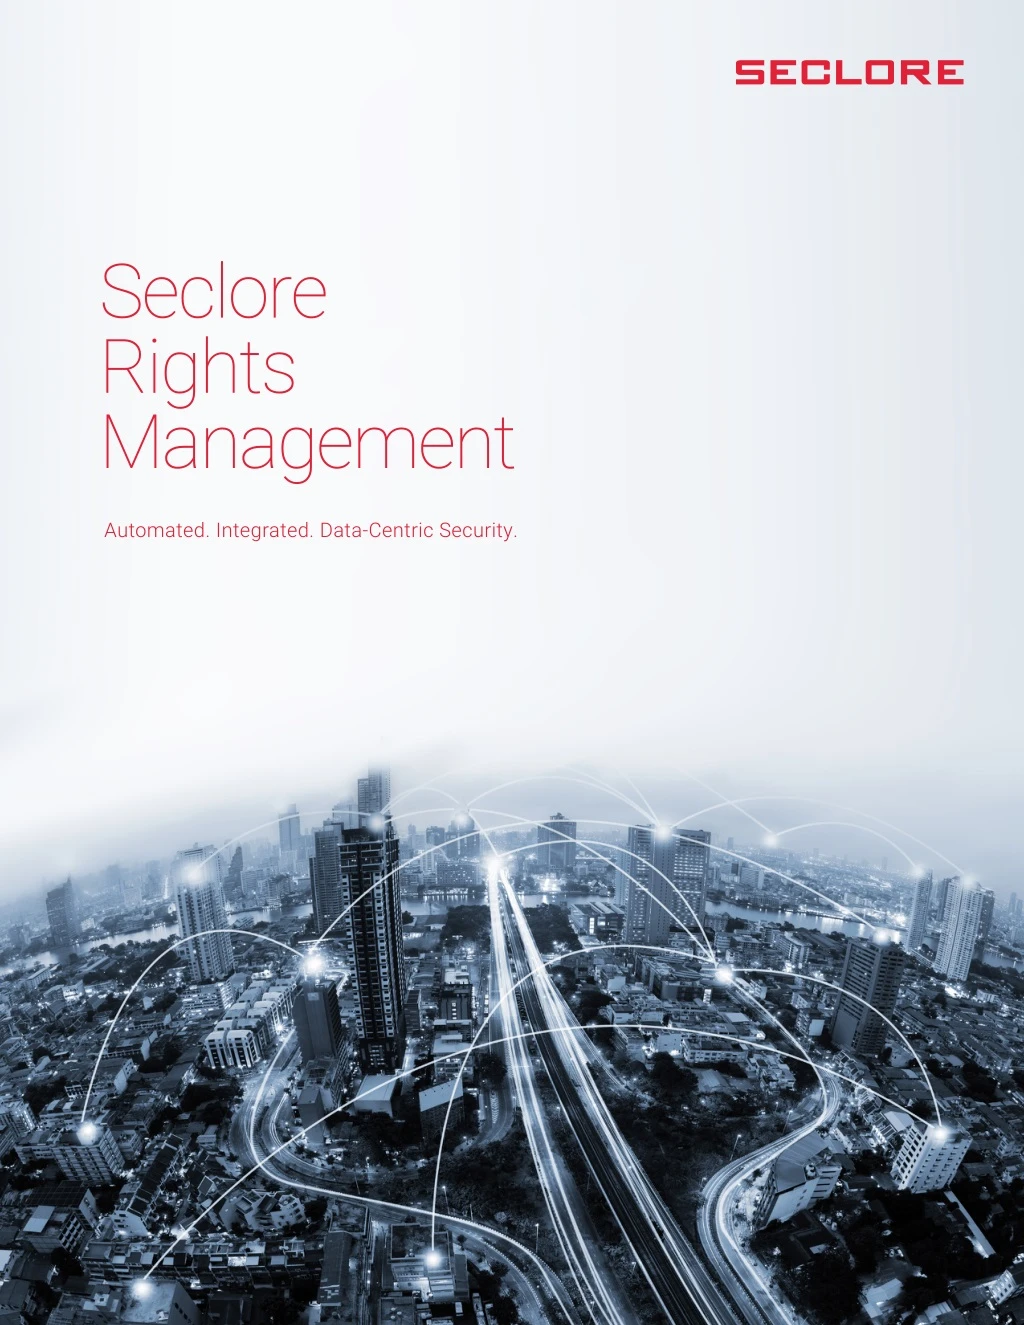 seclore rights management